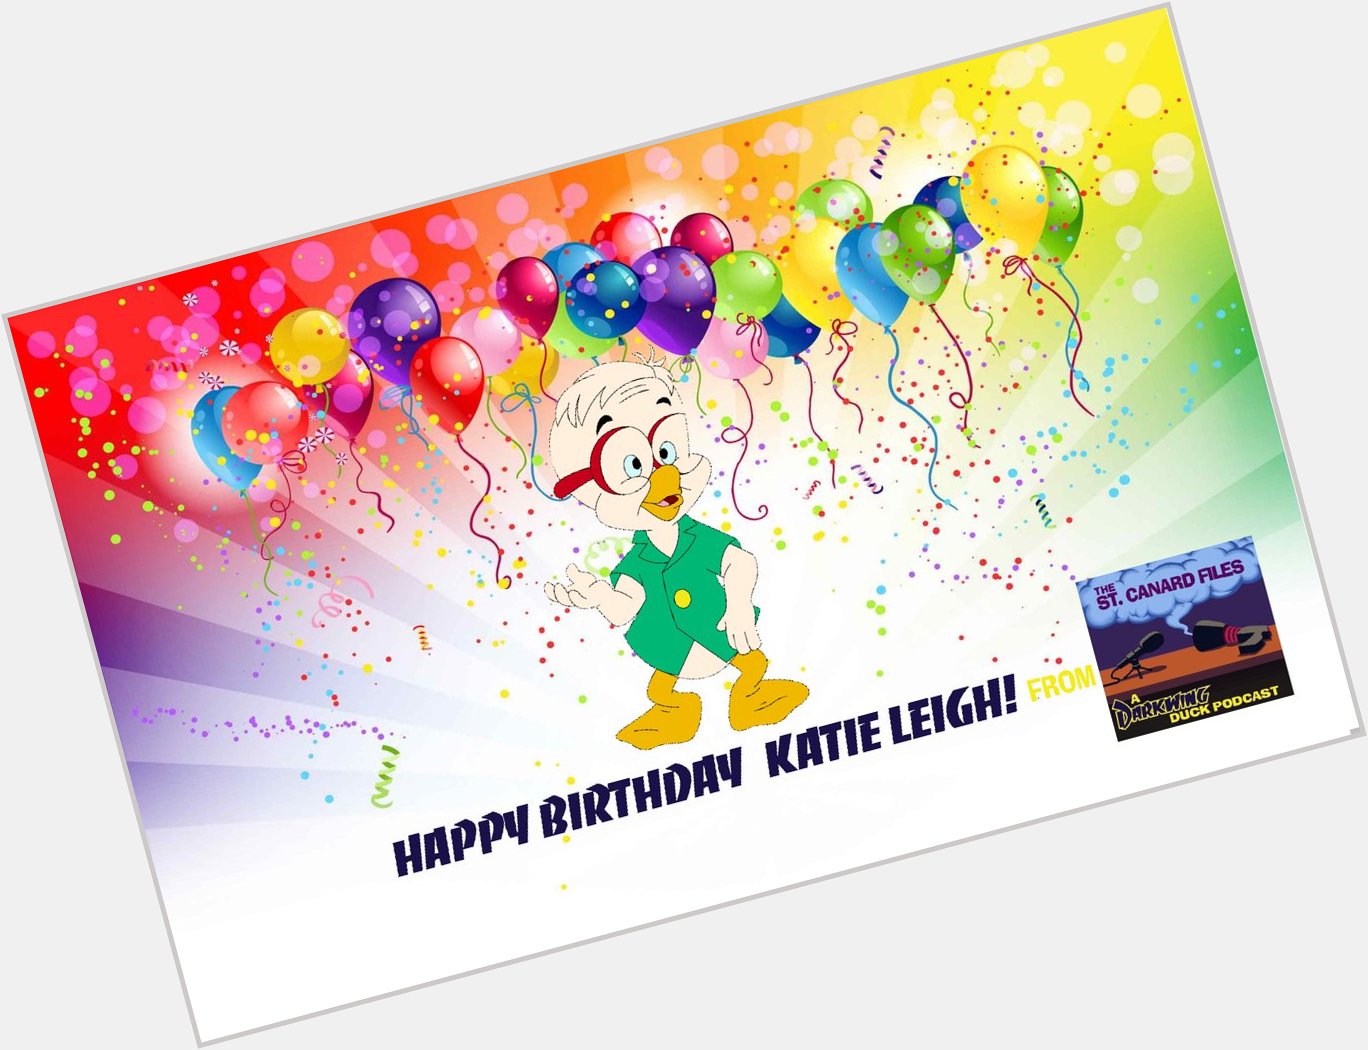 The St. Canard Files would like to wish Katie Leigh a very happy birthday.   